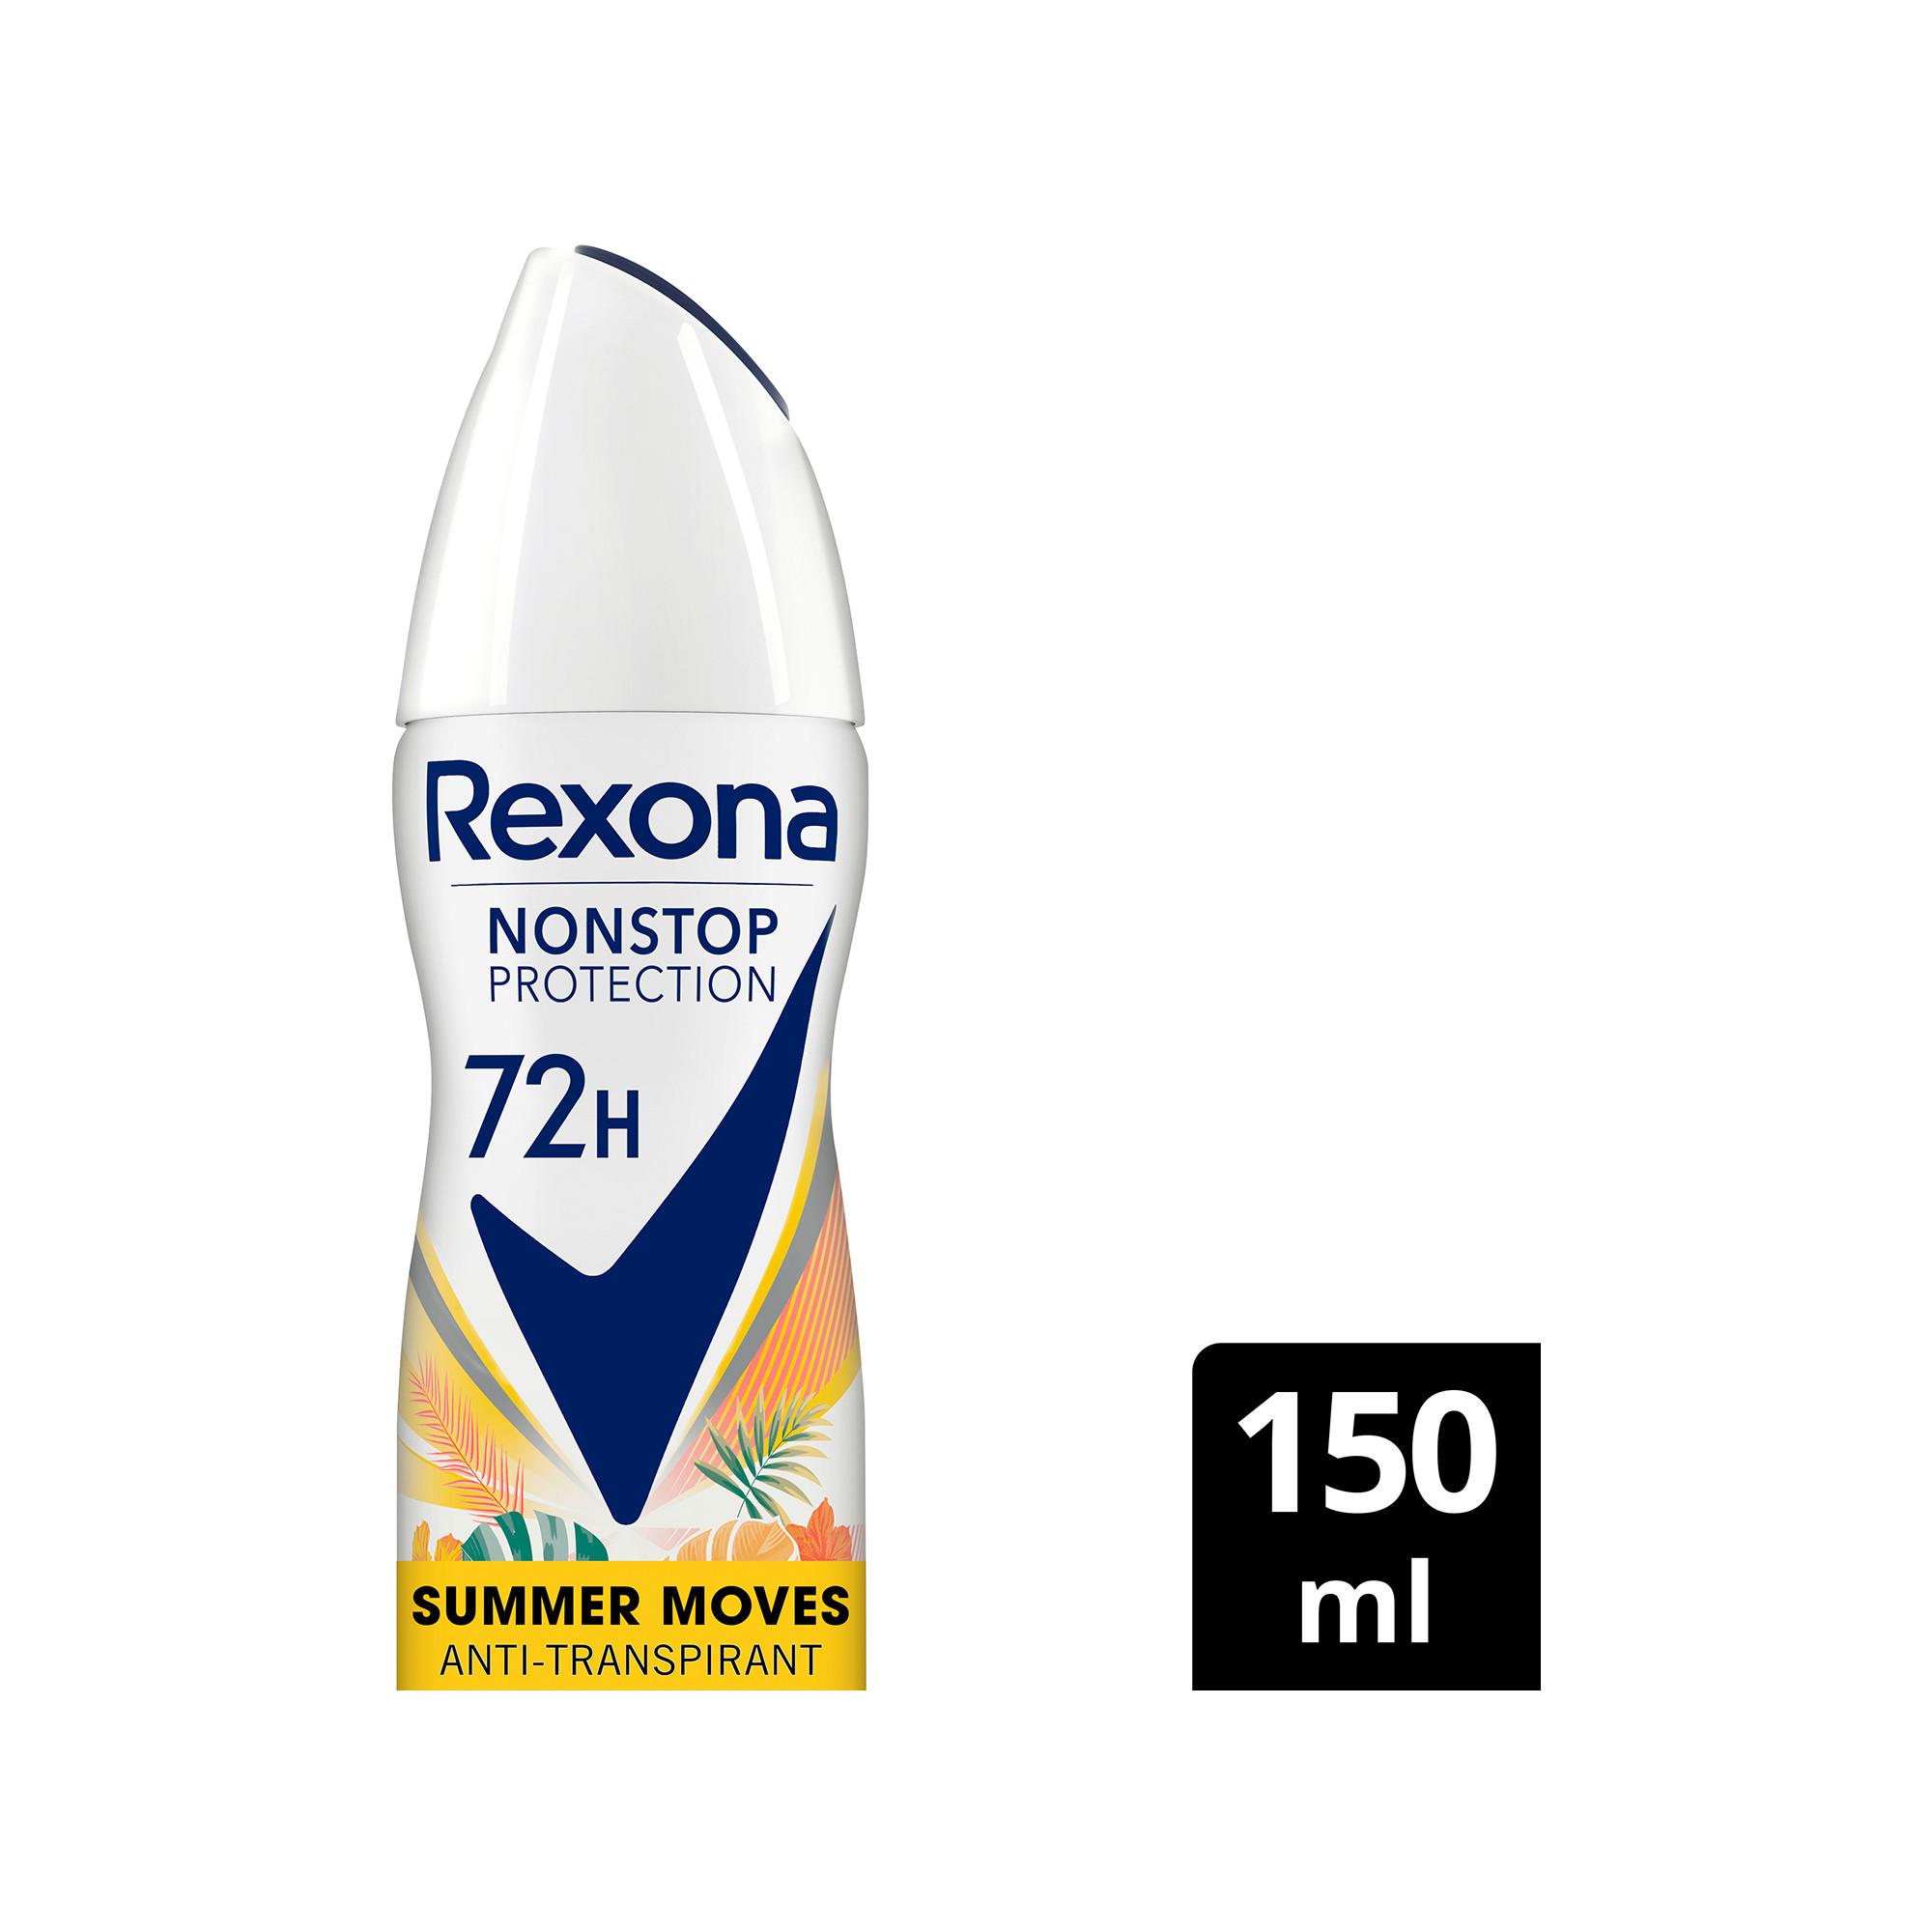 Rexona Nonstop Protection Anti-Transpirant Summer Moves Limited Edition Deospray 